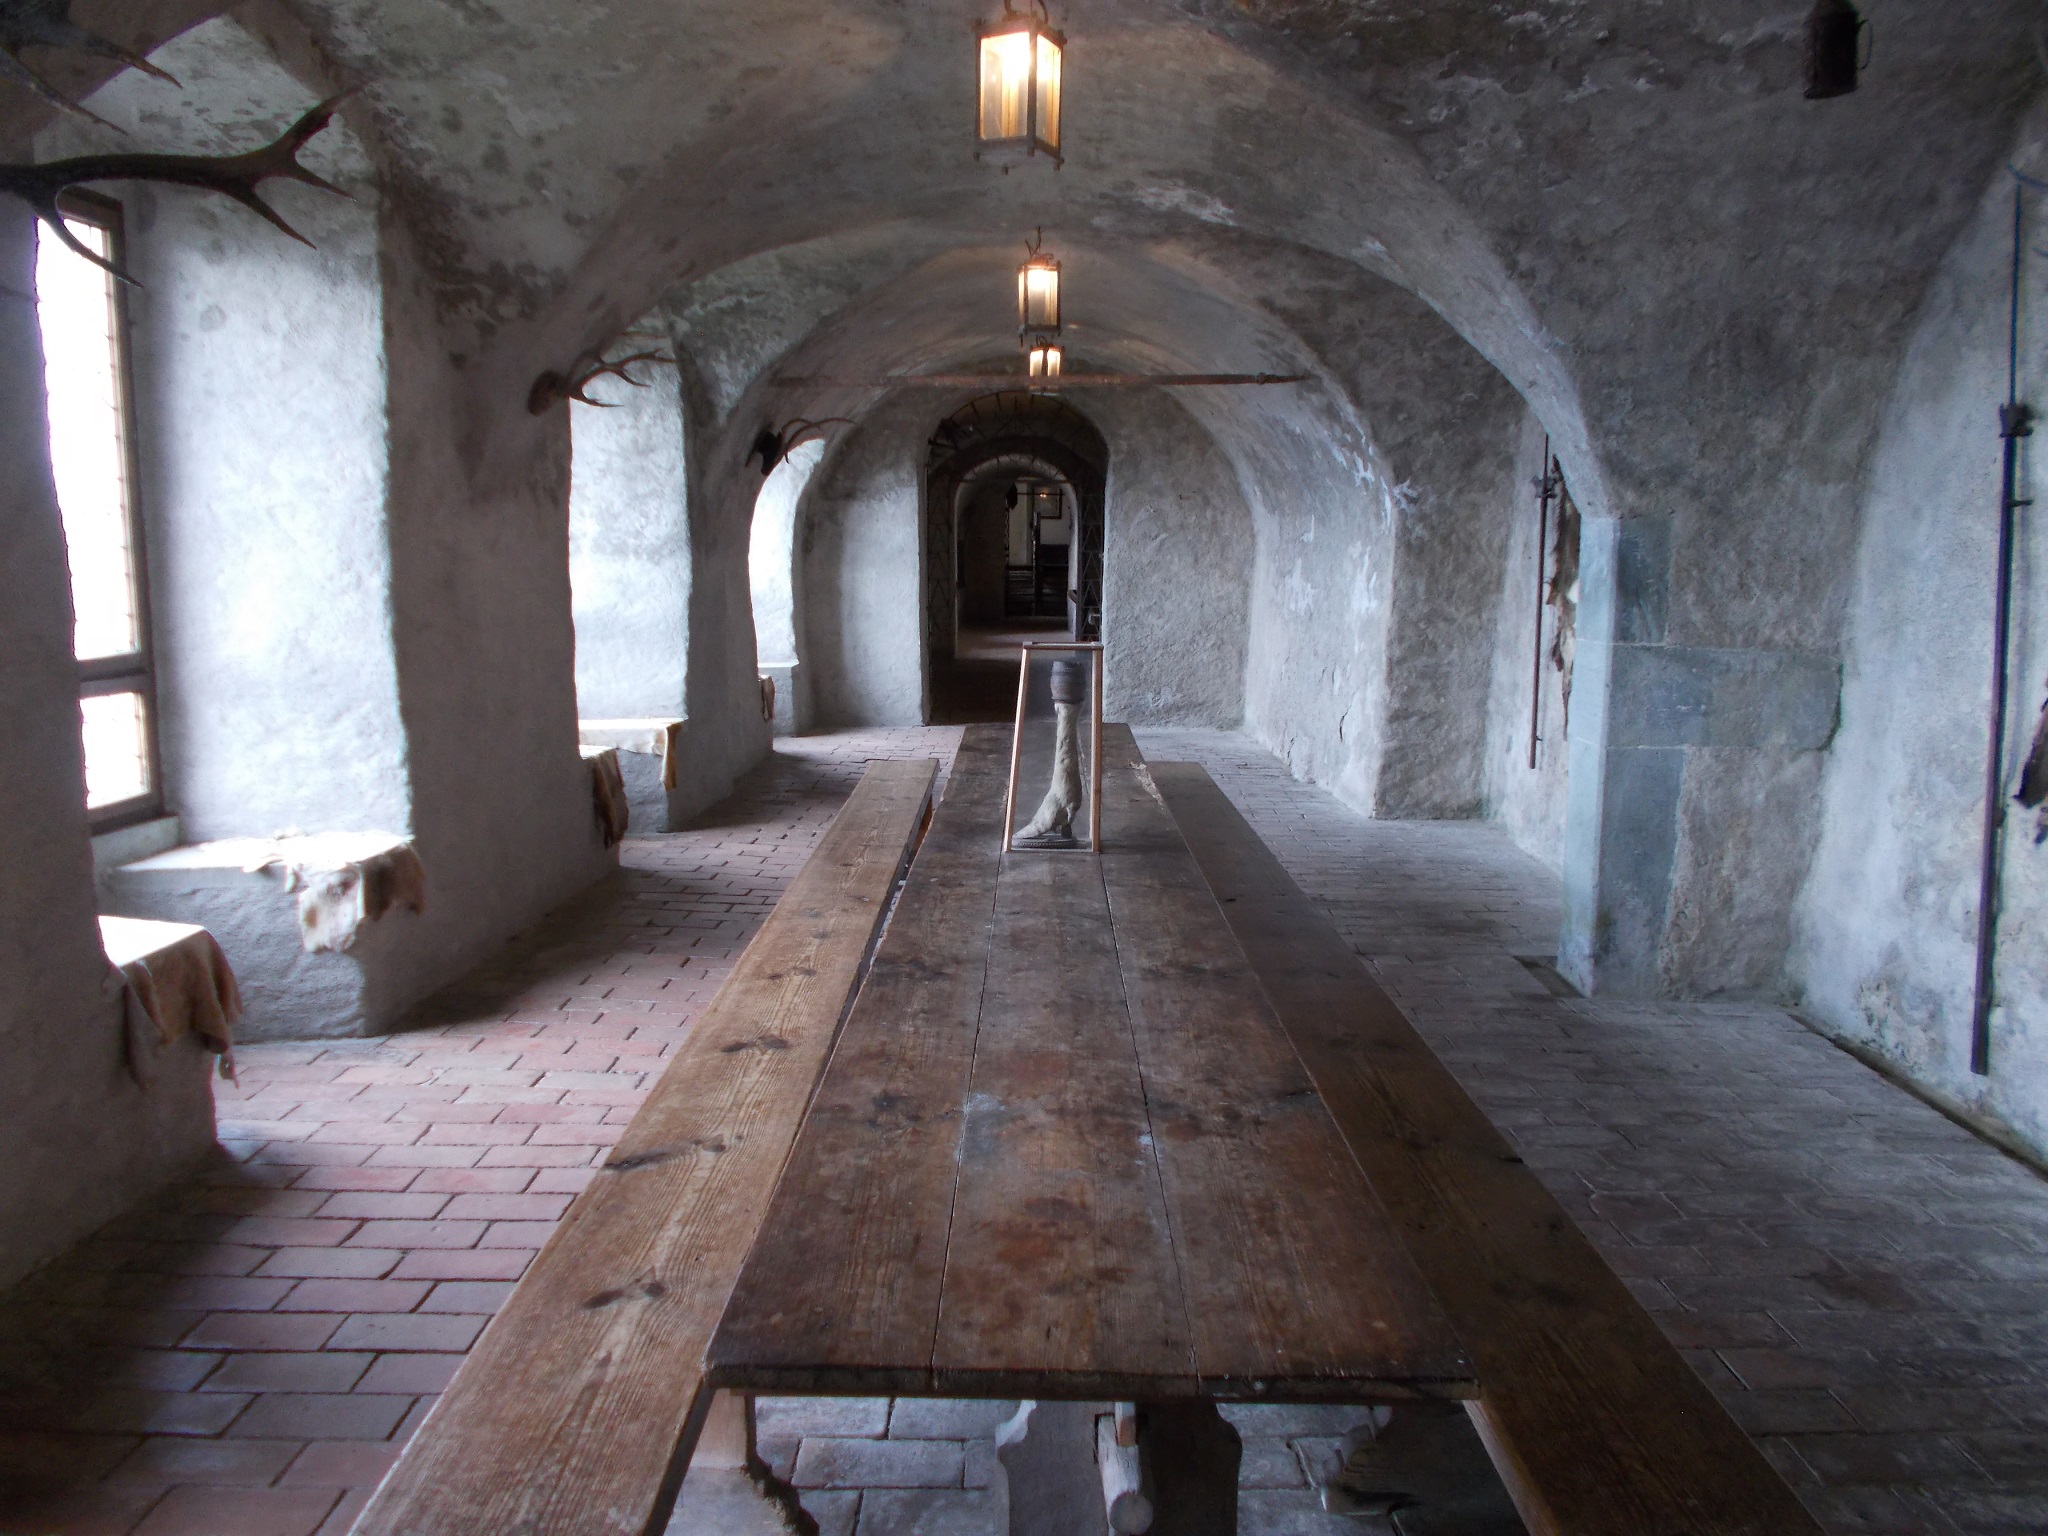 A long hallway with a long table running down it. Light from outside beams in from the left. Walls made of stone. Photo taken inside Burg Meersburg in Meersburg, Germany.